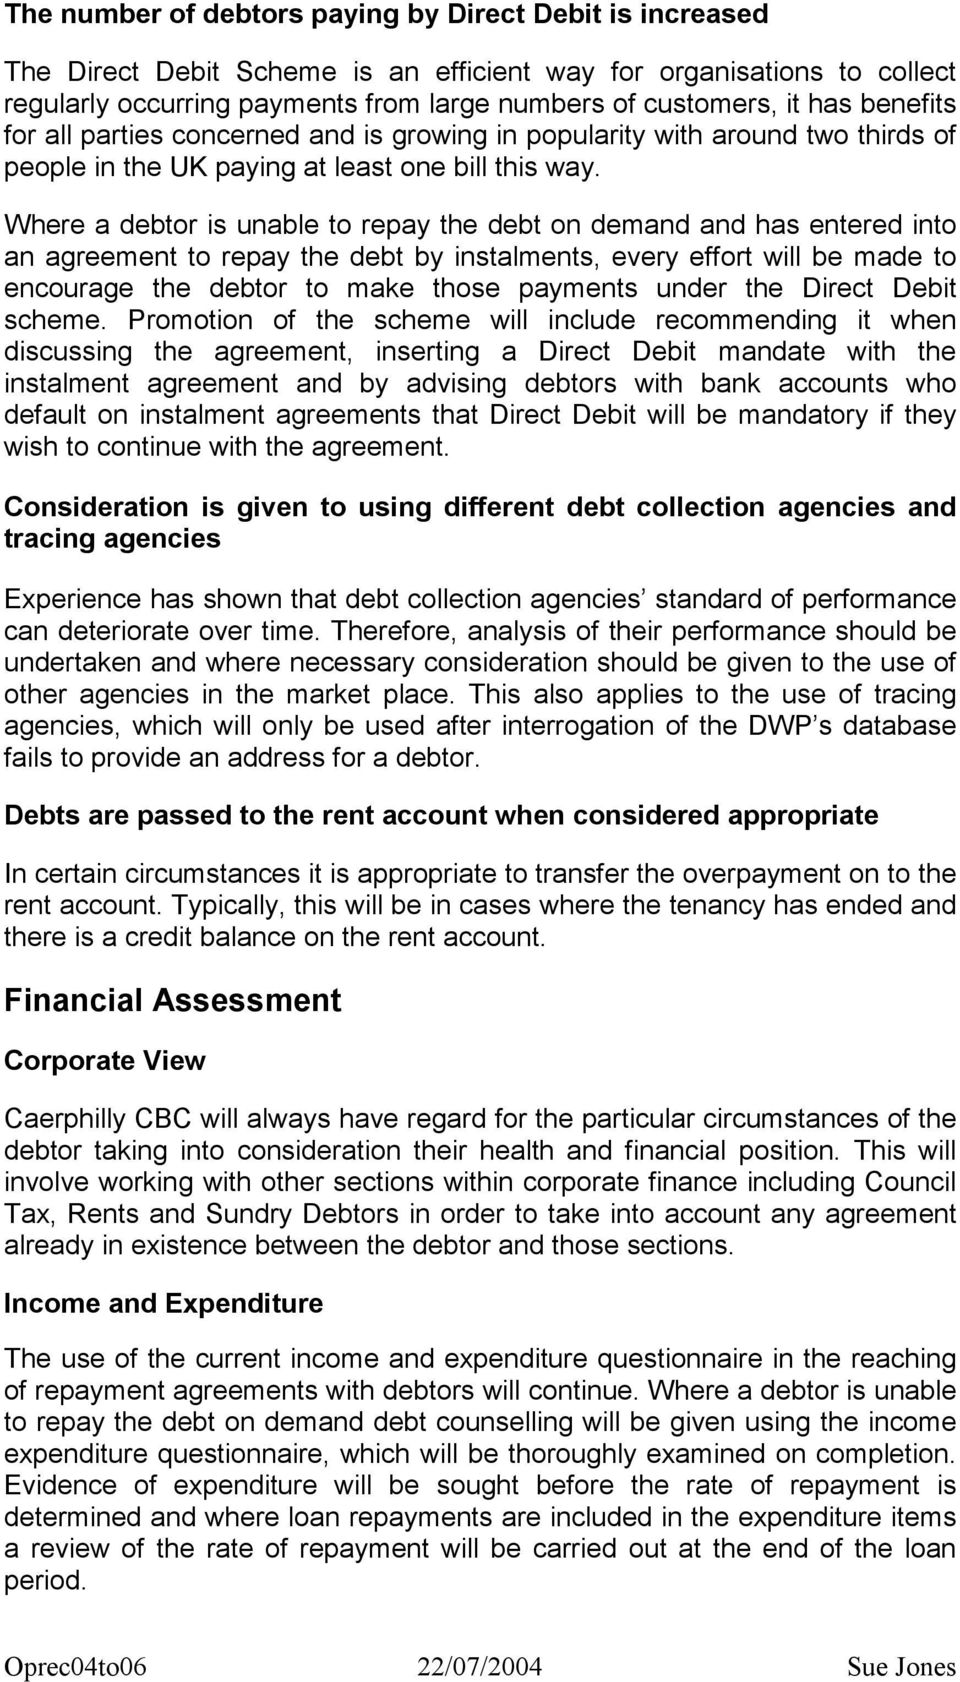 Where a debtor is unable to repay the debt on demand and has entered into an agreement to repay the debt by instalments, every effort will be made to encourage the debtor to make those payments under